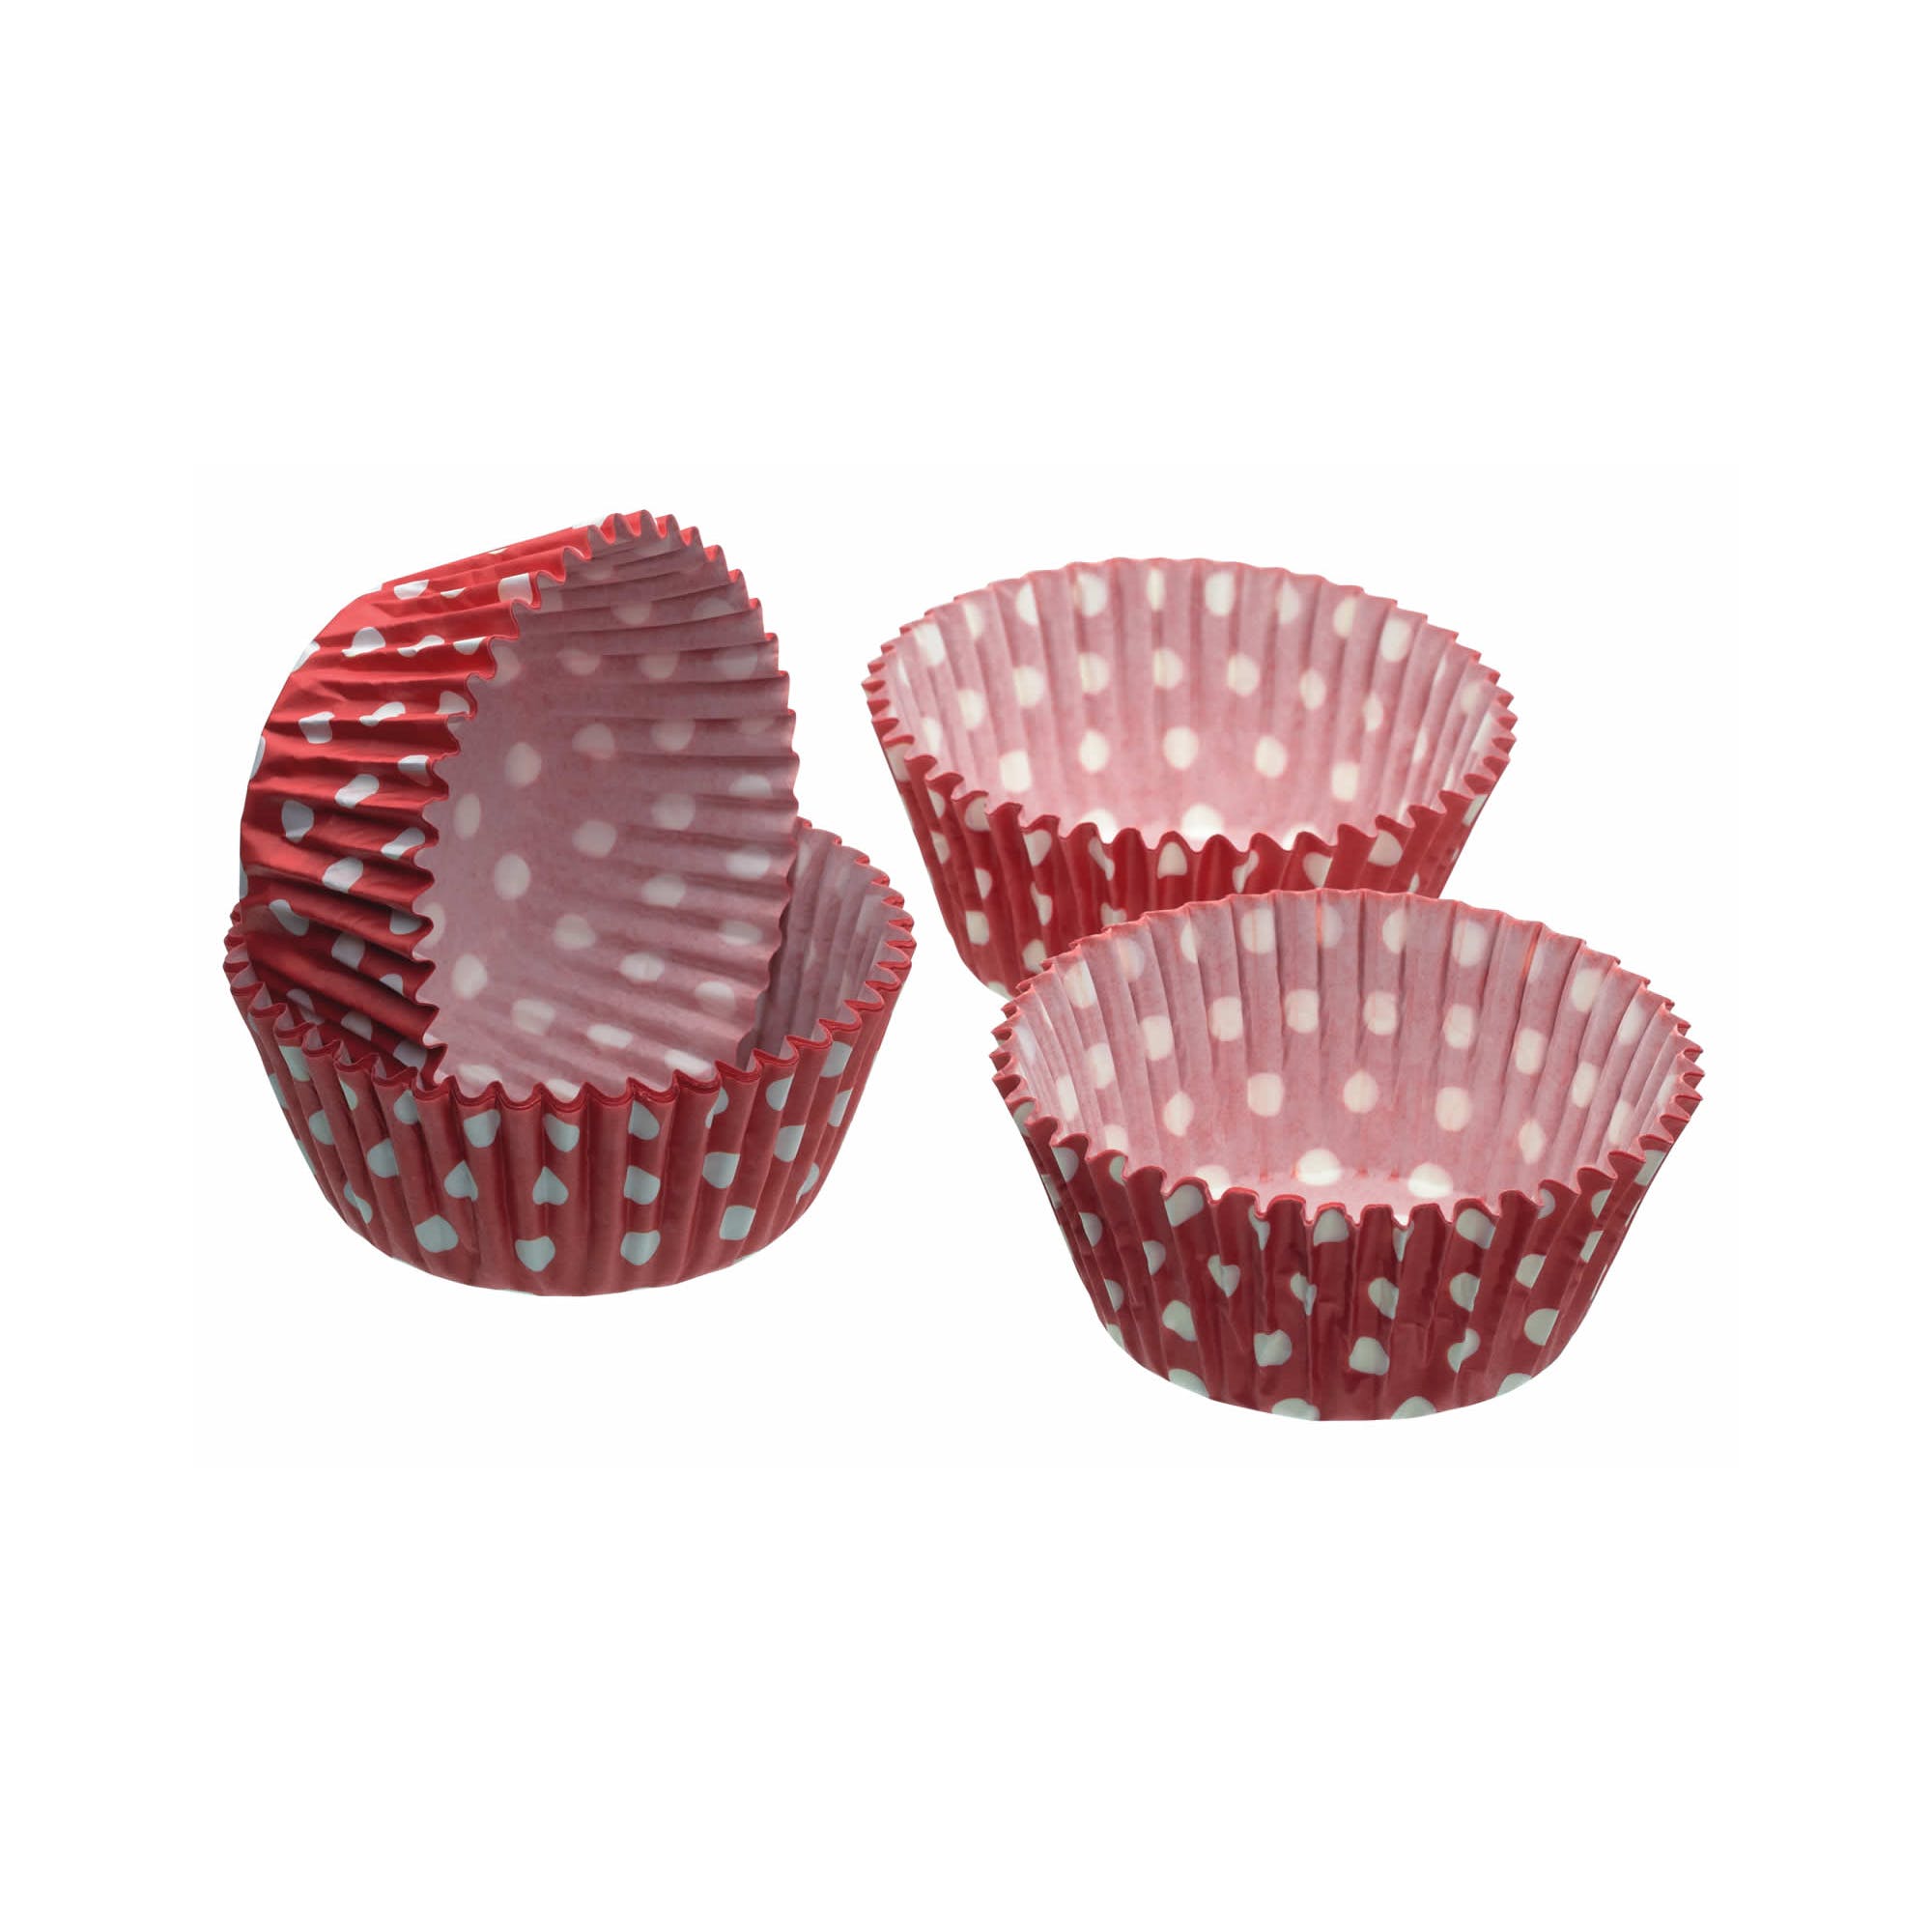 Sweetly Does It 60 Red Polka Dot Cupcake Cases 0829